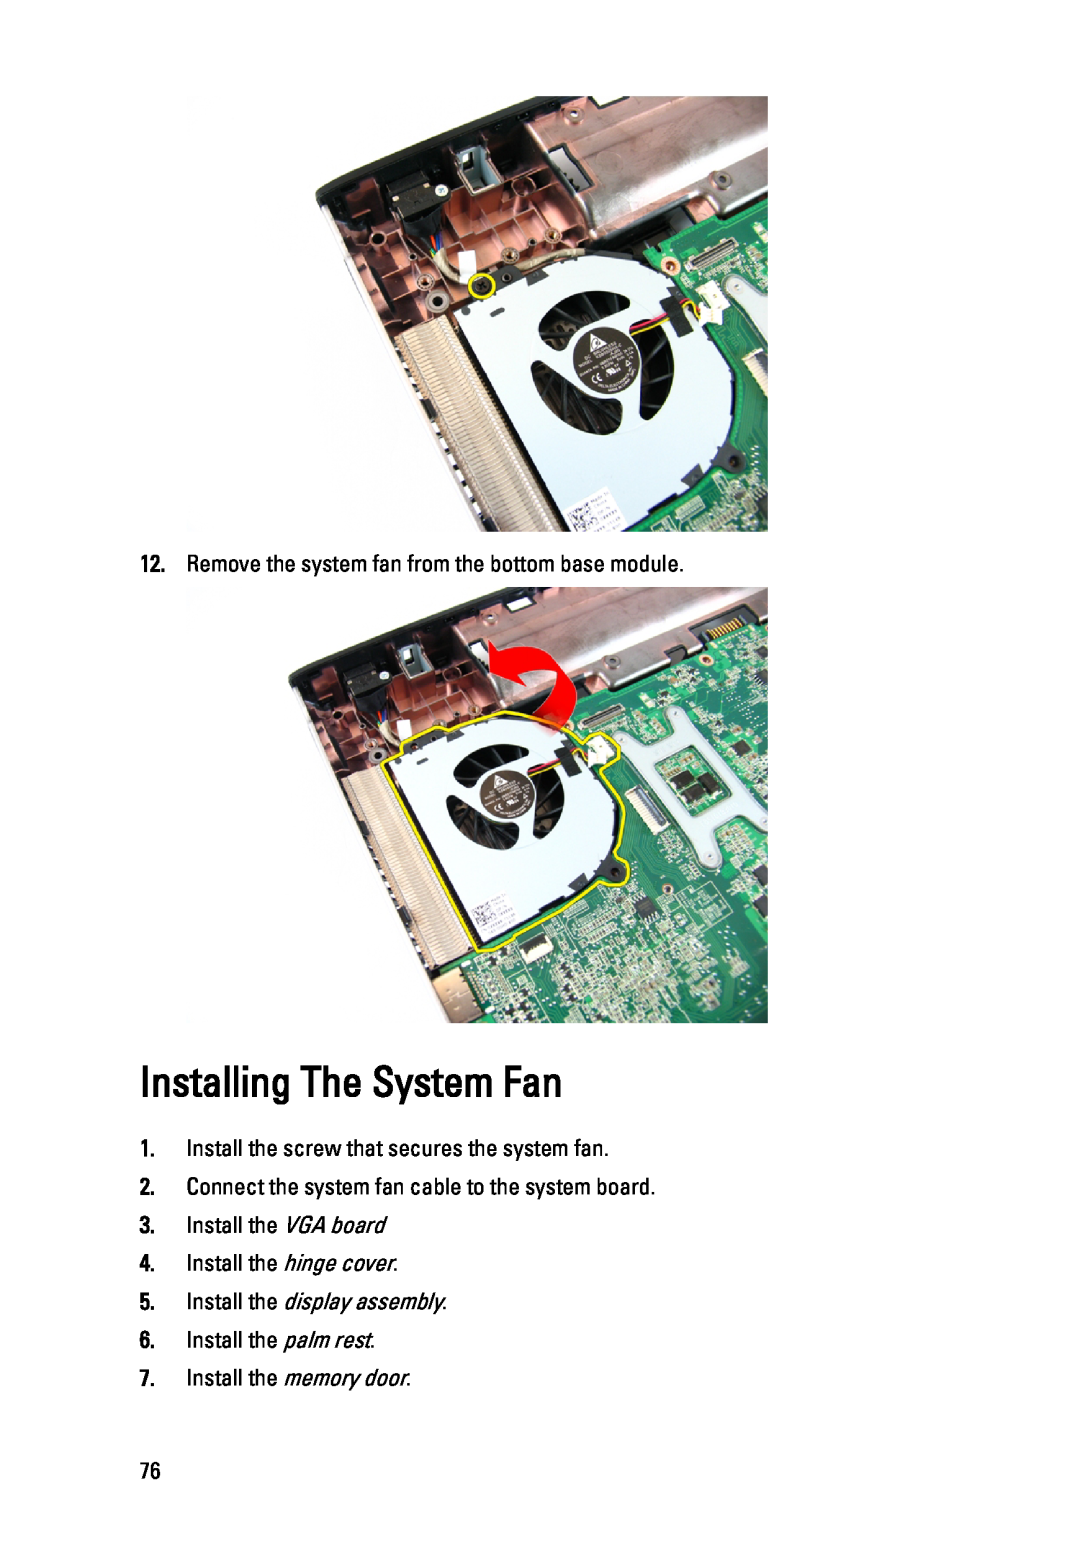 Dell 3450 Installing The System Fan, Remove the system fan from the bottom base module, Install the display assembly 